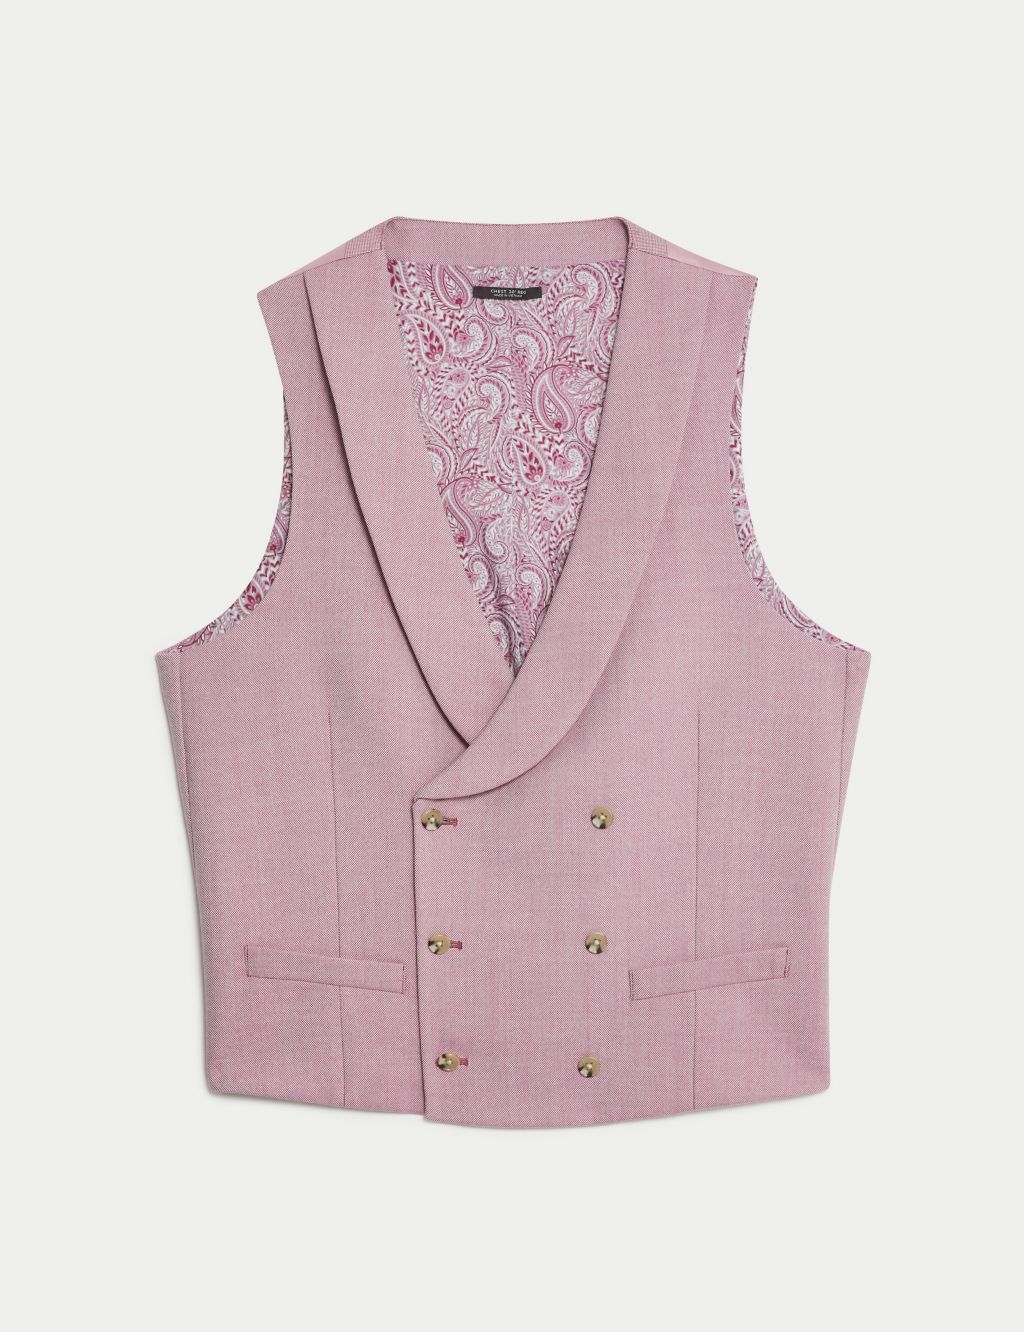 Wool Blend Double Breasted Waistcoat image 2